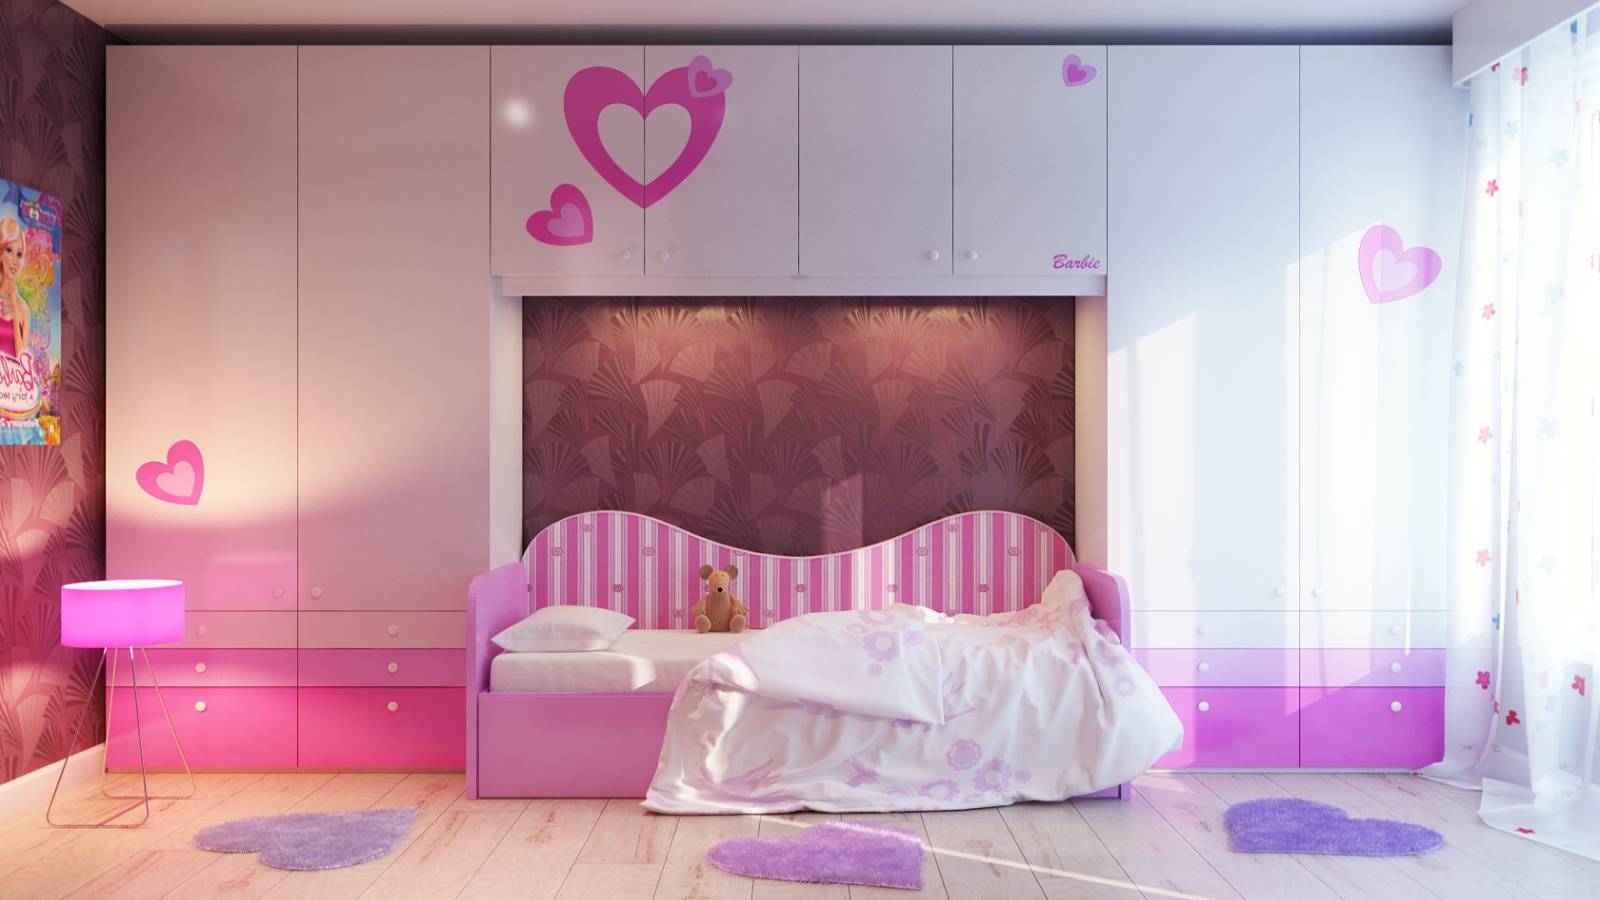 Bedroom Design for Girls: Beautiful and Unique